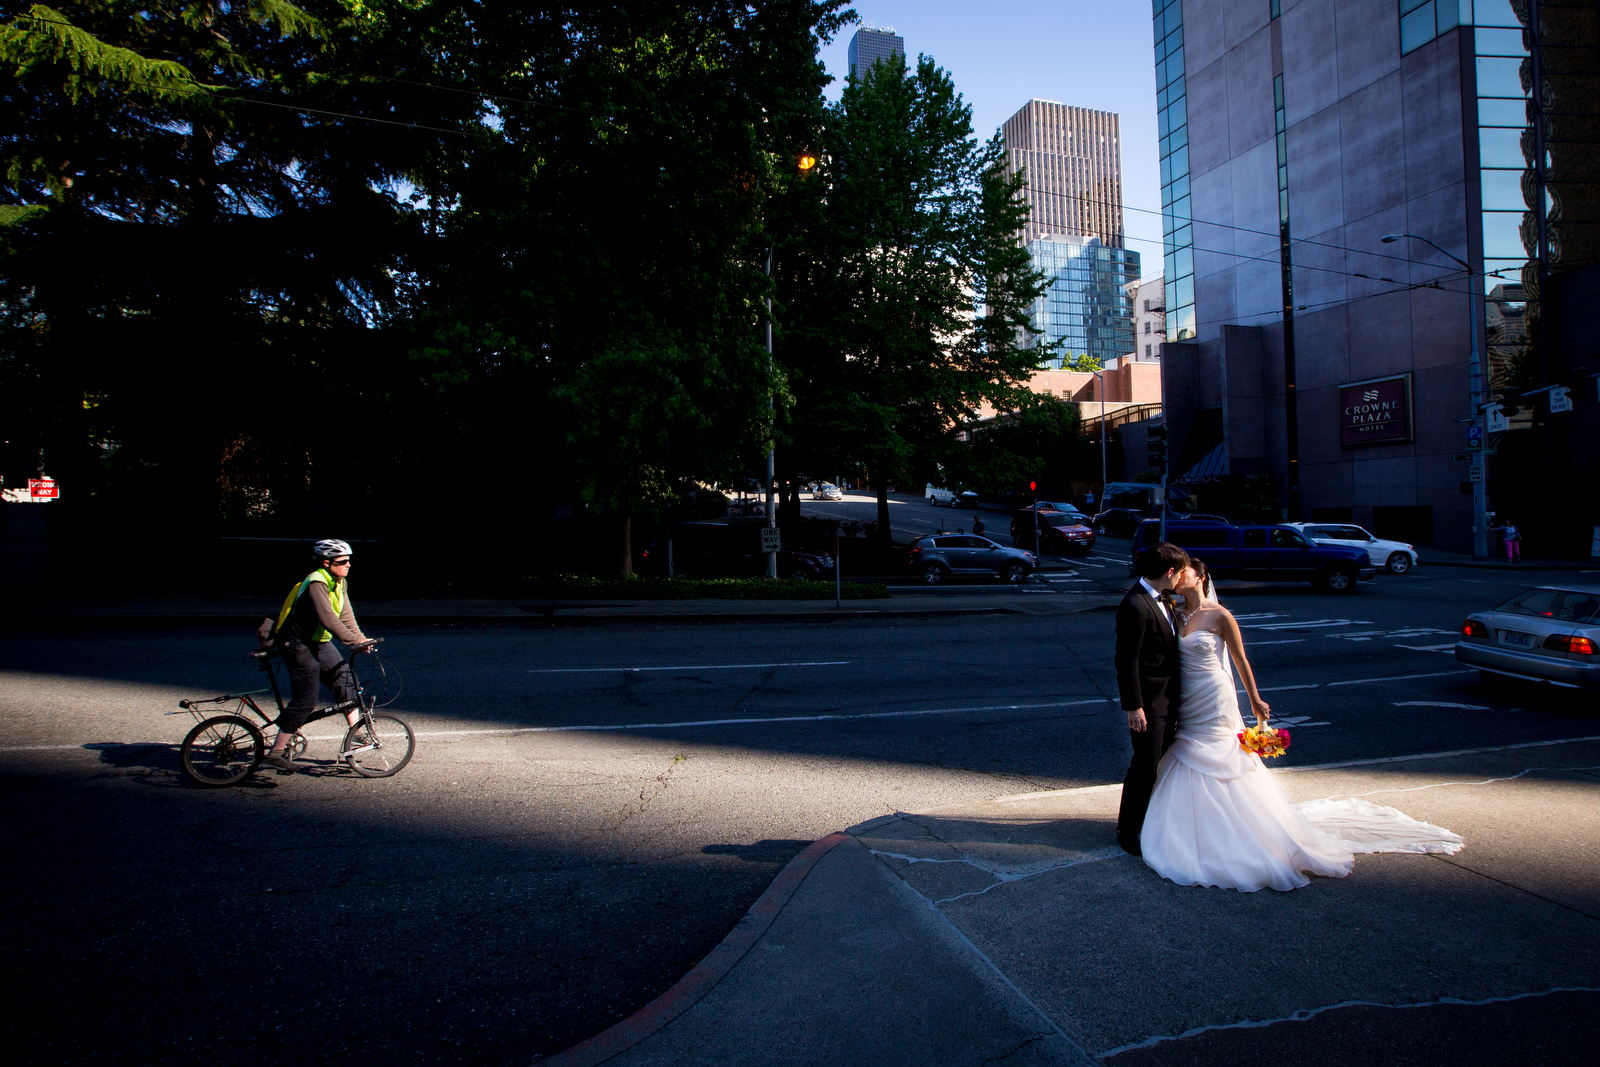 The bride and groom share a kiss in downtown Seattle prior to the start of their wedding at the Seattle Aquarium. (Wedding Photography by Scott Eklund - Red Box Pictures)